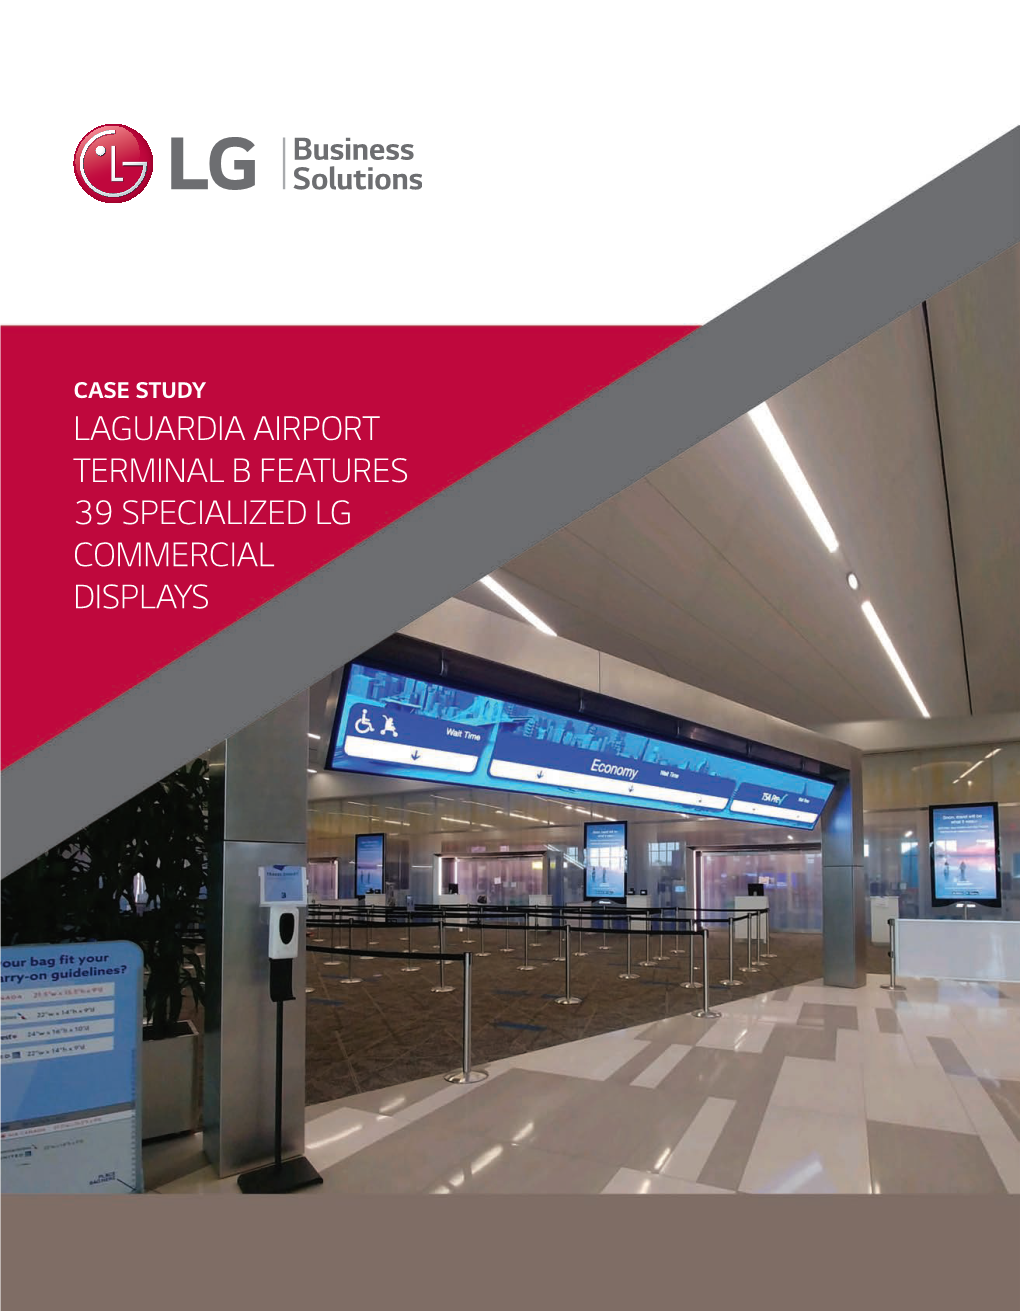 Laguardia Airport Terminal B Features 39 Specialized Lg Commercial Displays